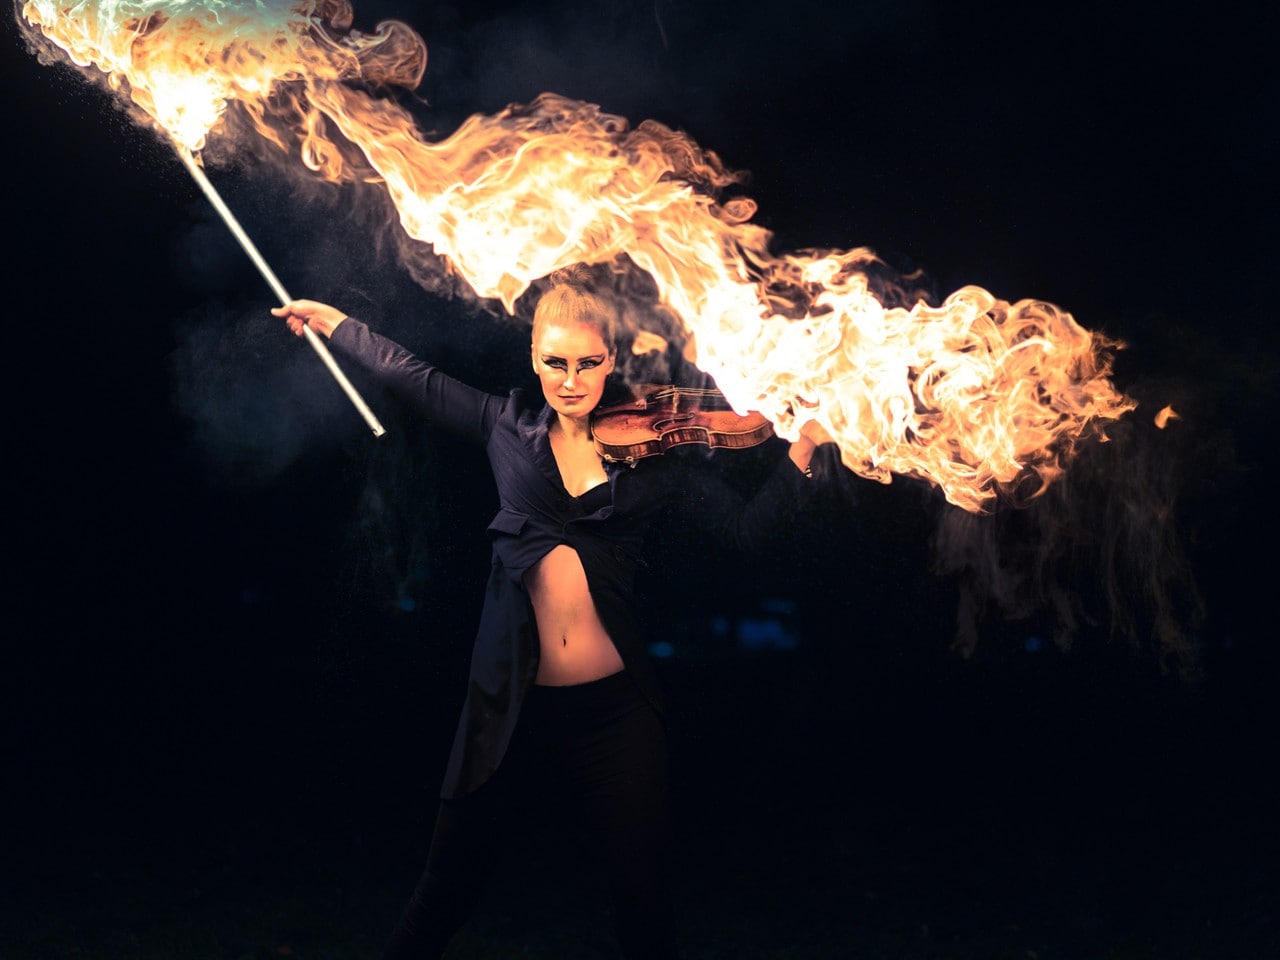 Female performing with violin and fire